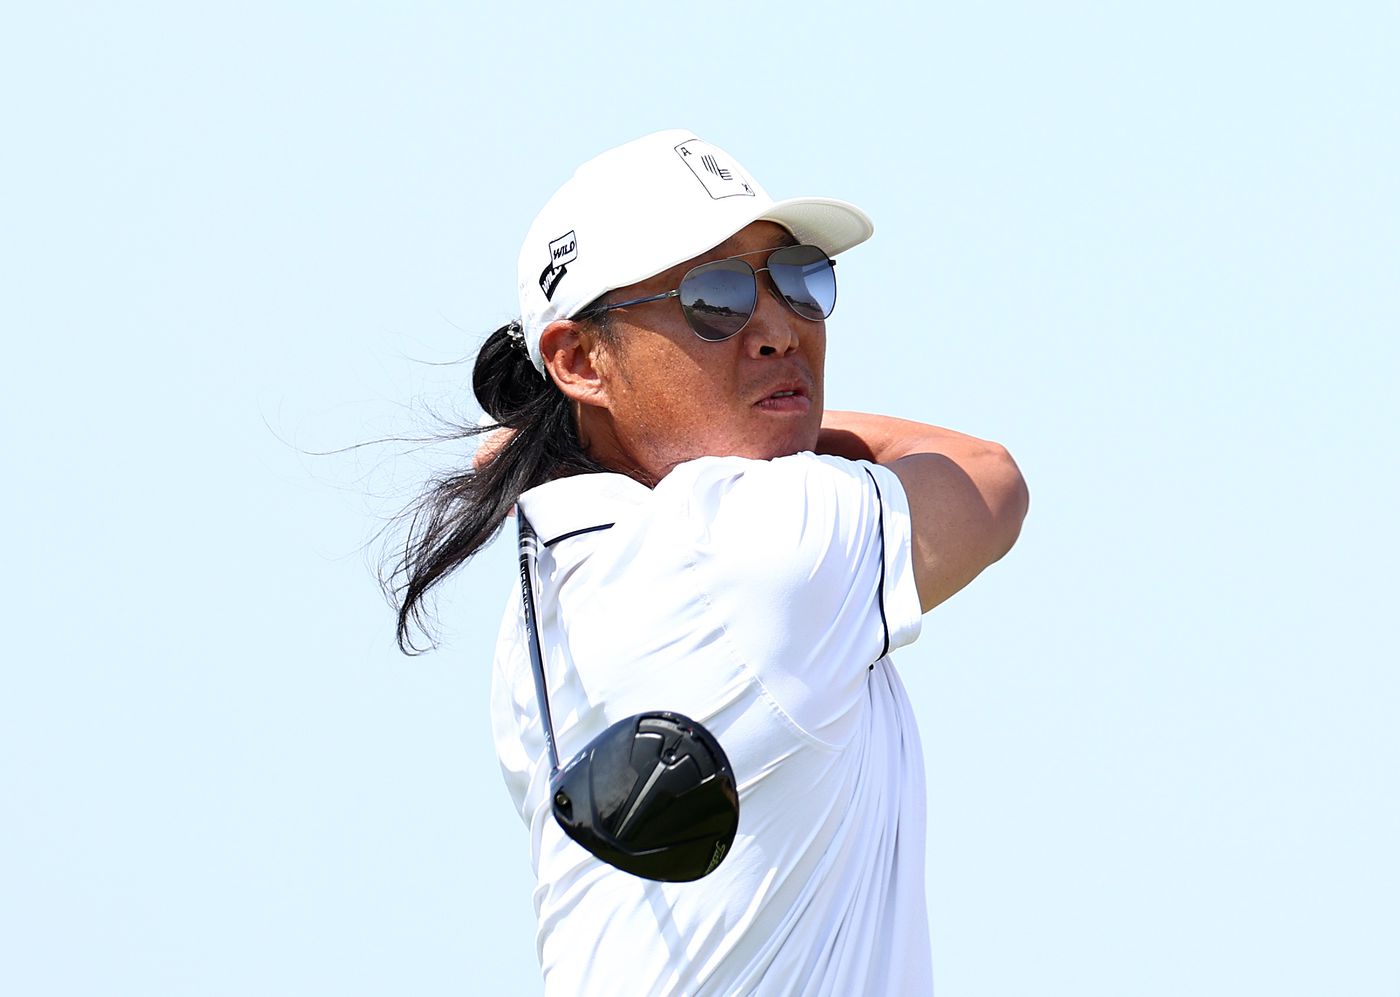 anthony kim opens liv golf career with wild shank, sits in dead last